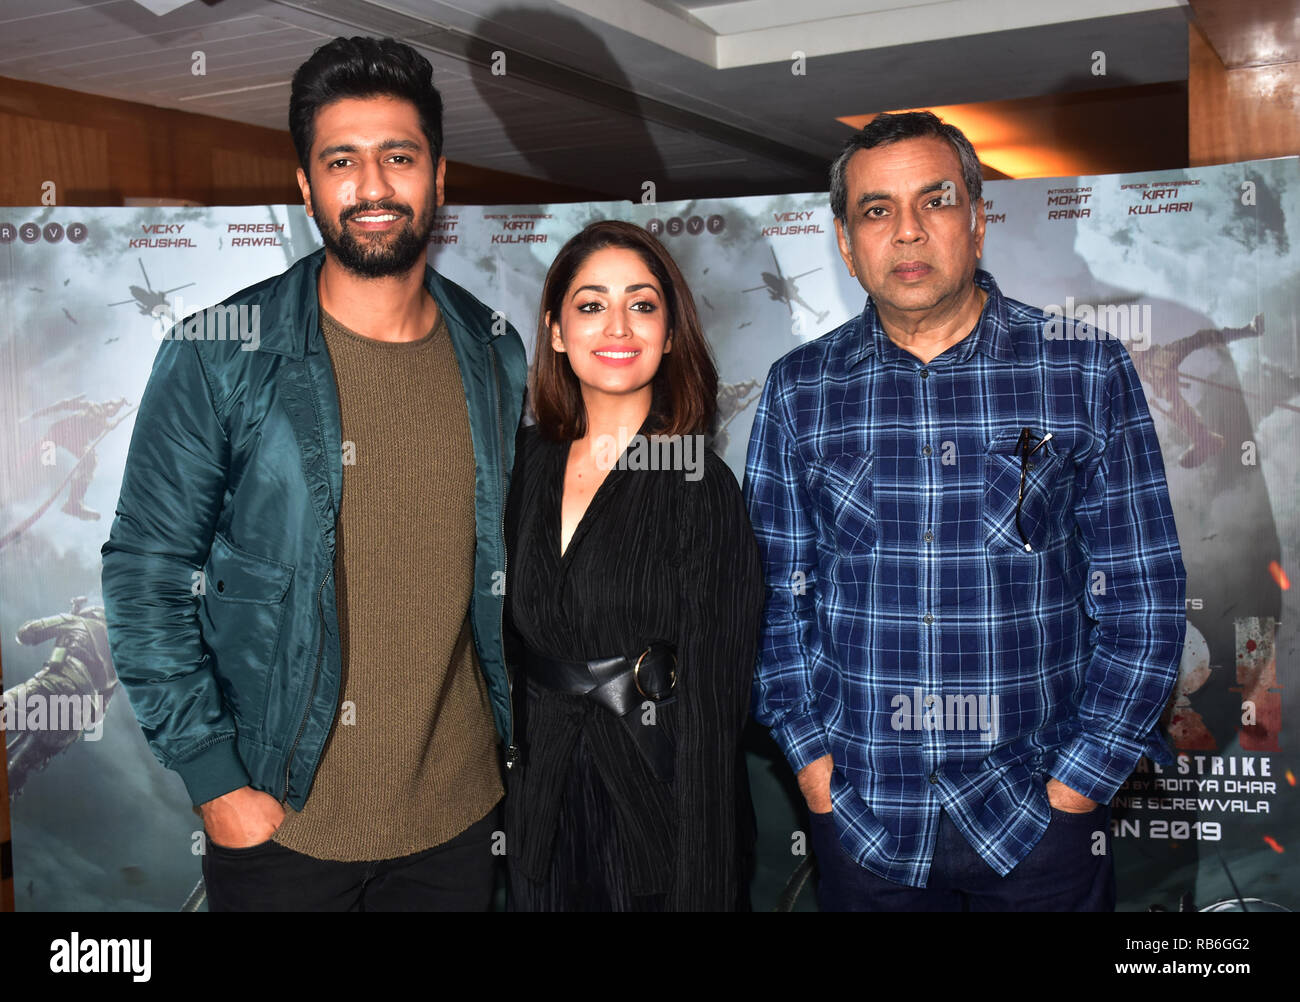 Mumbai, India. 7th Jan, 2019. Actor Vicky Kaushal (L), with actress Yami Gautam (C) and Paresh Rawal (R) are seen during the promotion of their upcoming film 'URI: The Surgical Strike' at Sun and Sand Hotel, Juhu in Mumbai. The film is based on the true events of 2016, when Indian Army avenged a deadly terrorist attack by carrying out a surgical strike. Credit: Azhar Khan/SOPA Images/ZUMA Wire/Alamy Live News Stock Photo